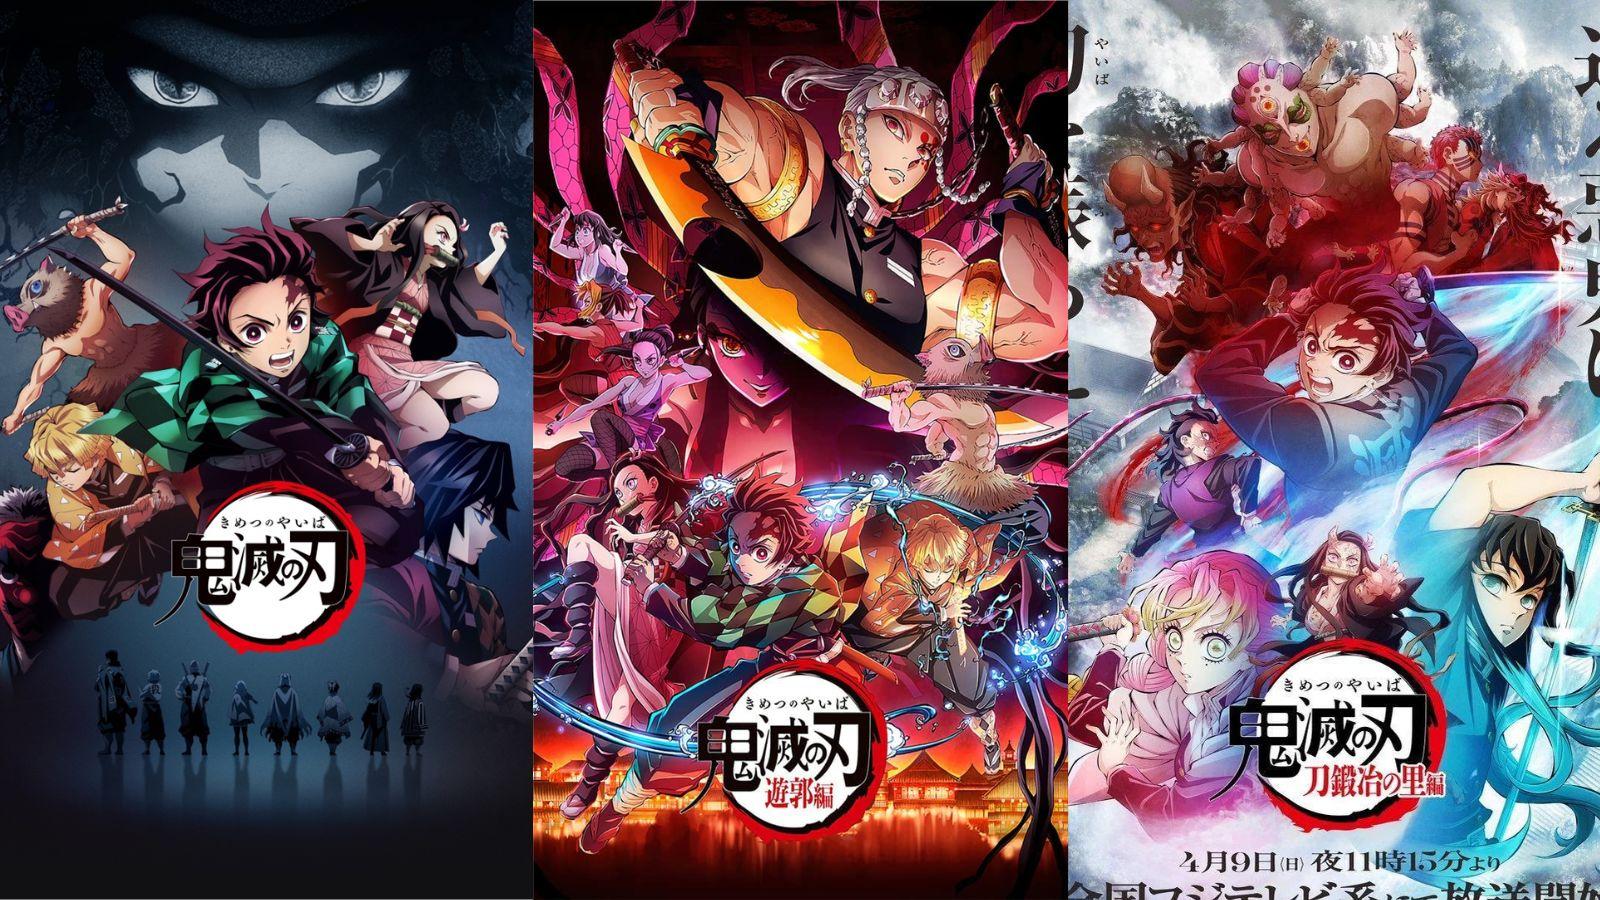 An image of Demon Slayer posters